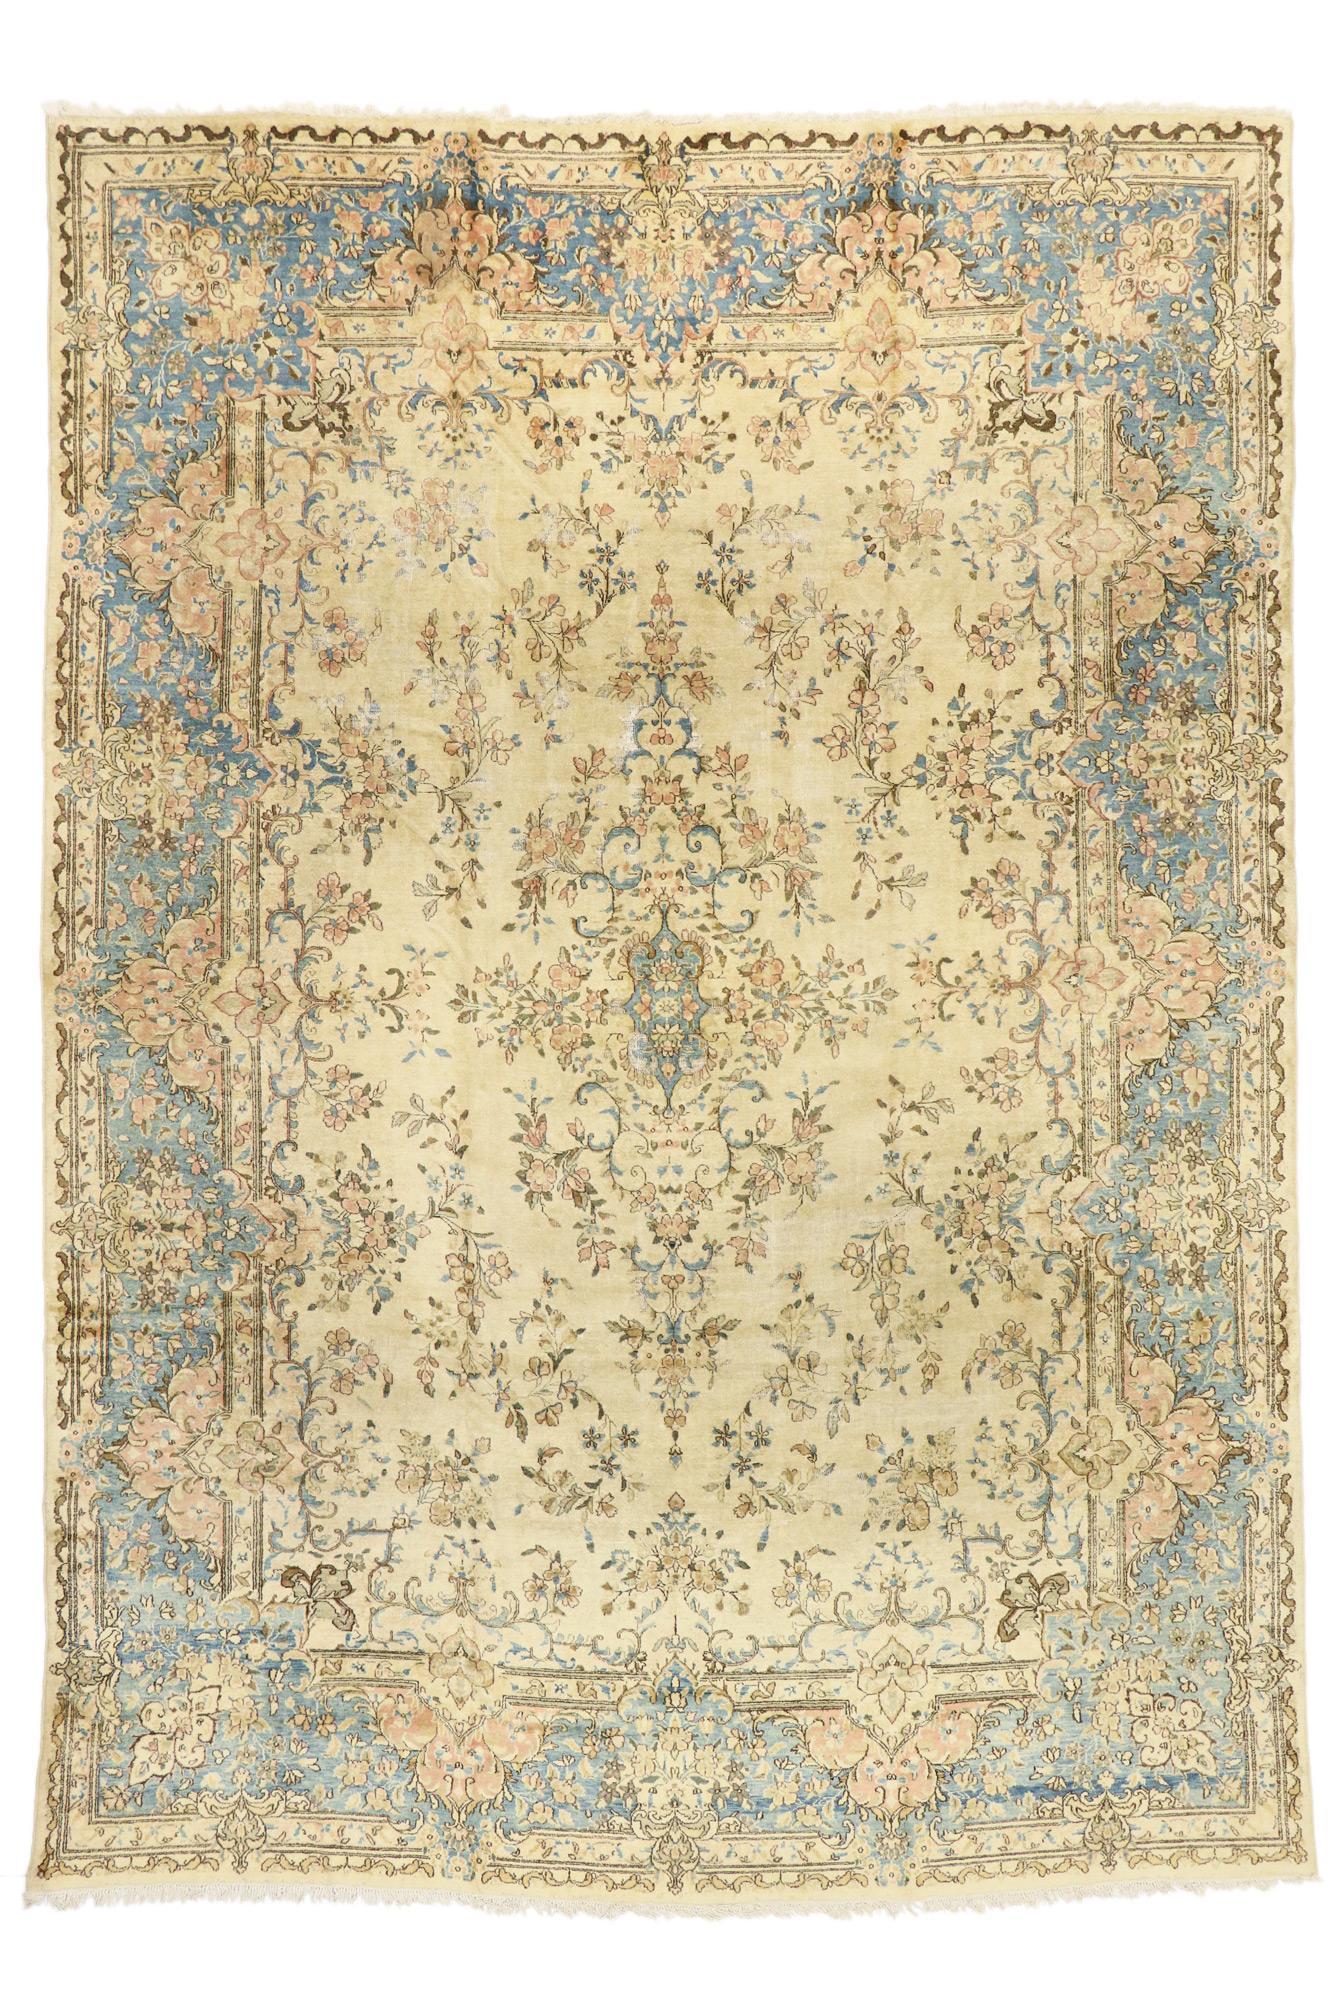 Antique Persian Kerman Rug with Soft Pastel Colors and Decorative Elegance For Sale 5